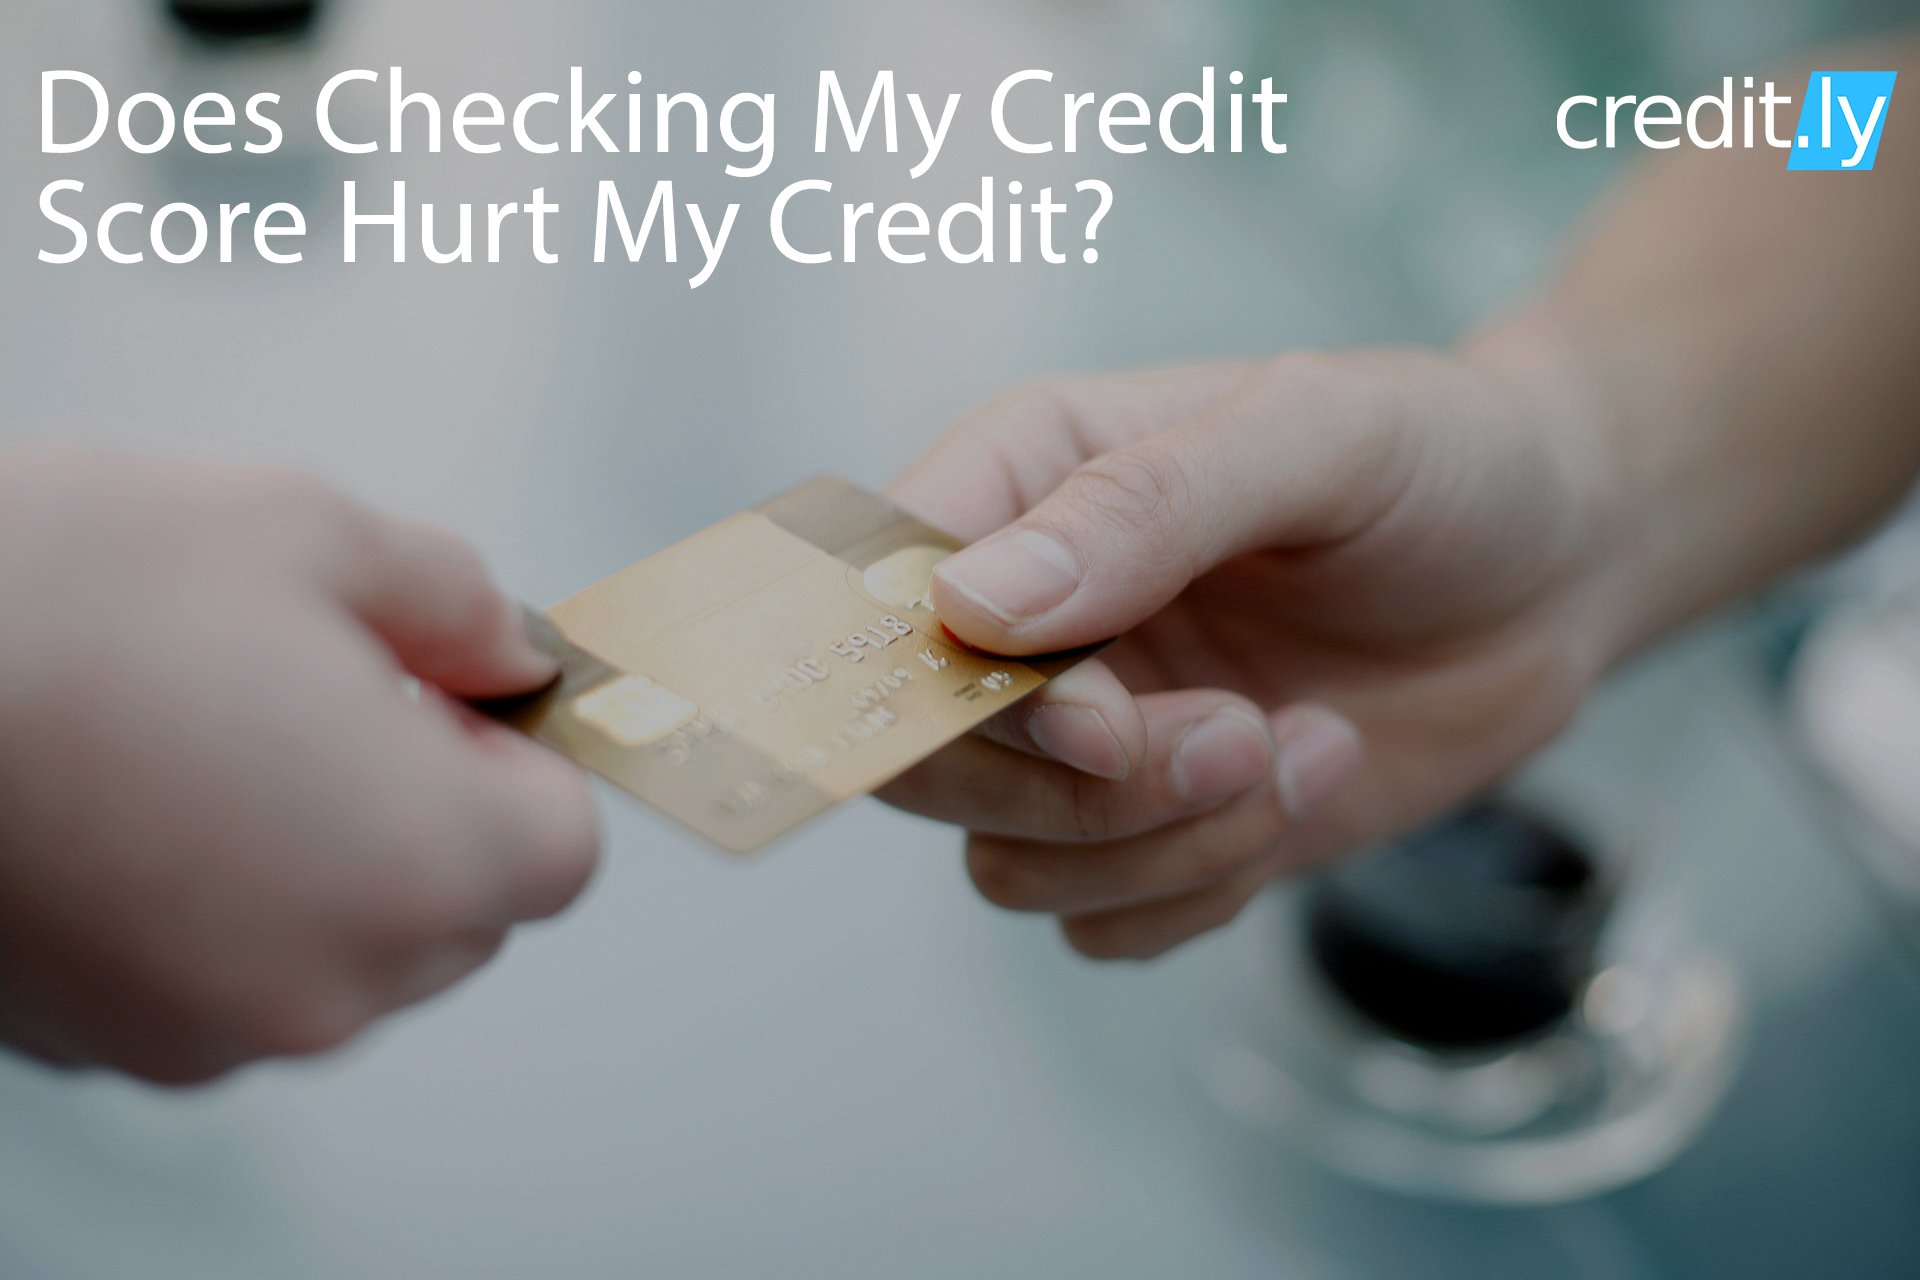 Does Checking My Credit Score Hurt My Credit